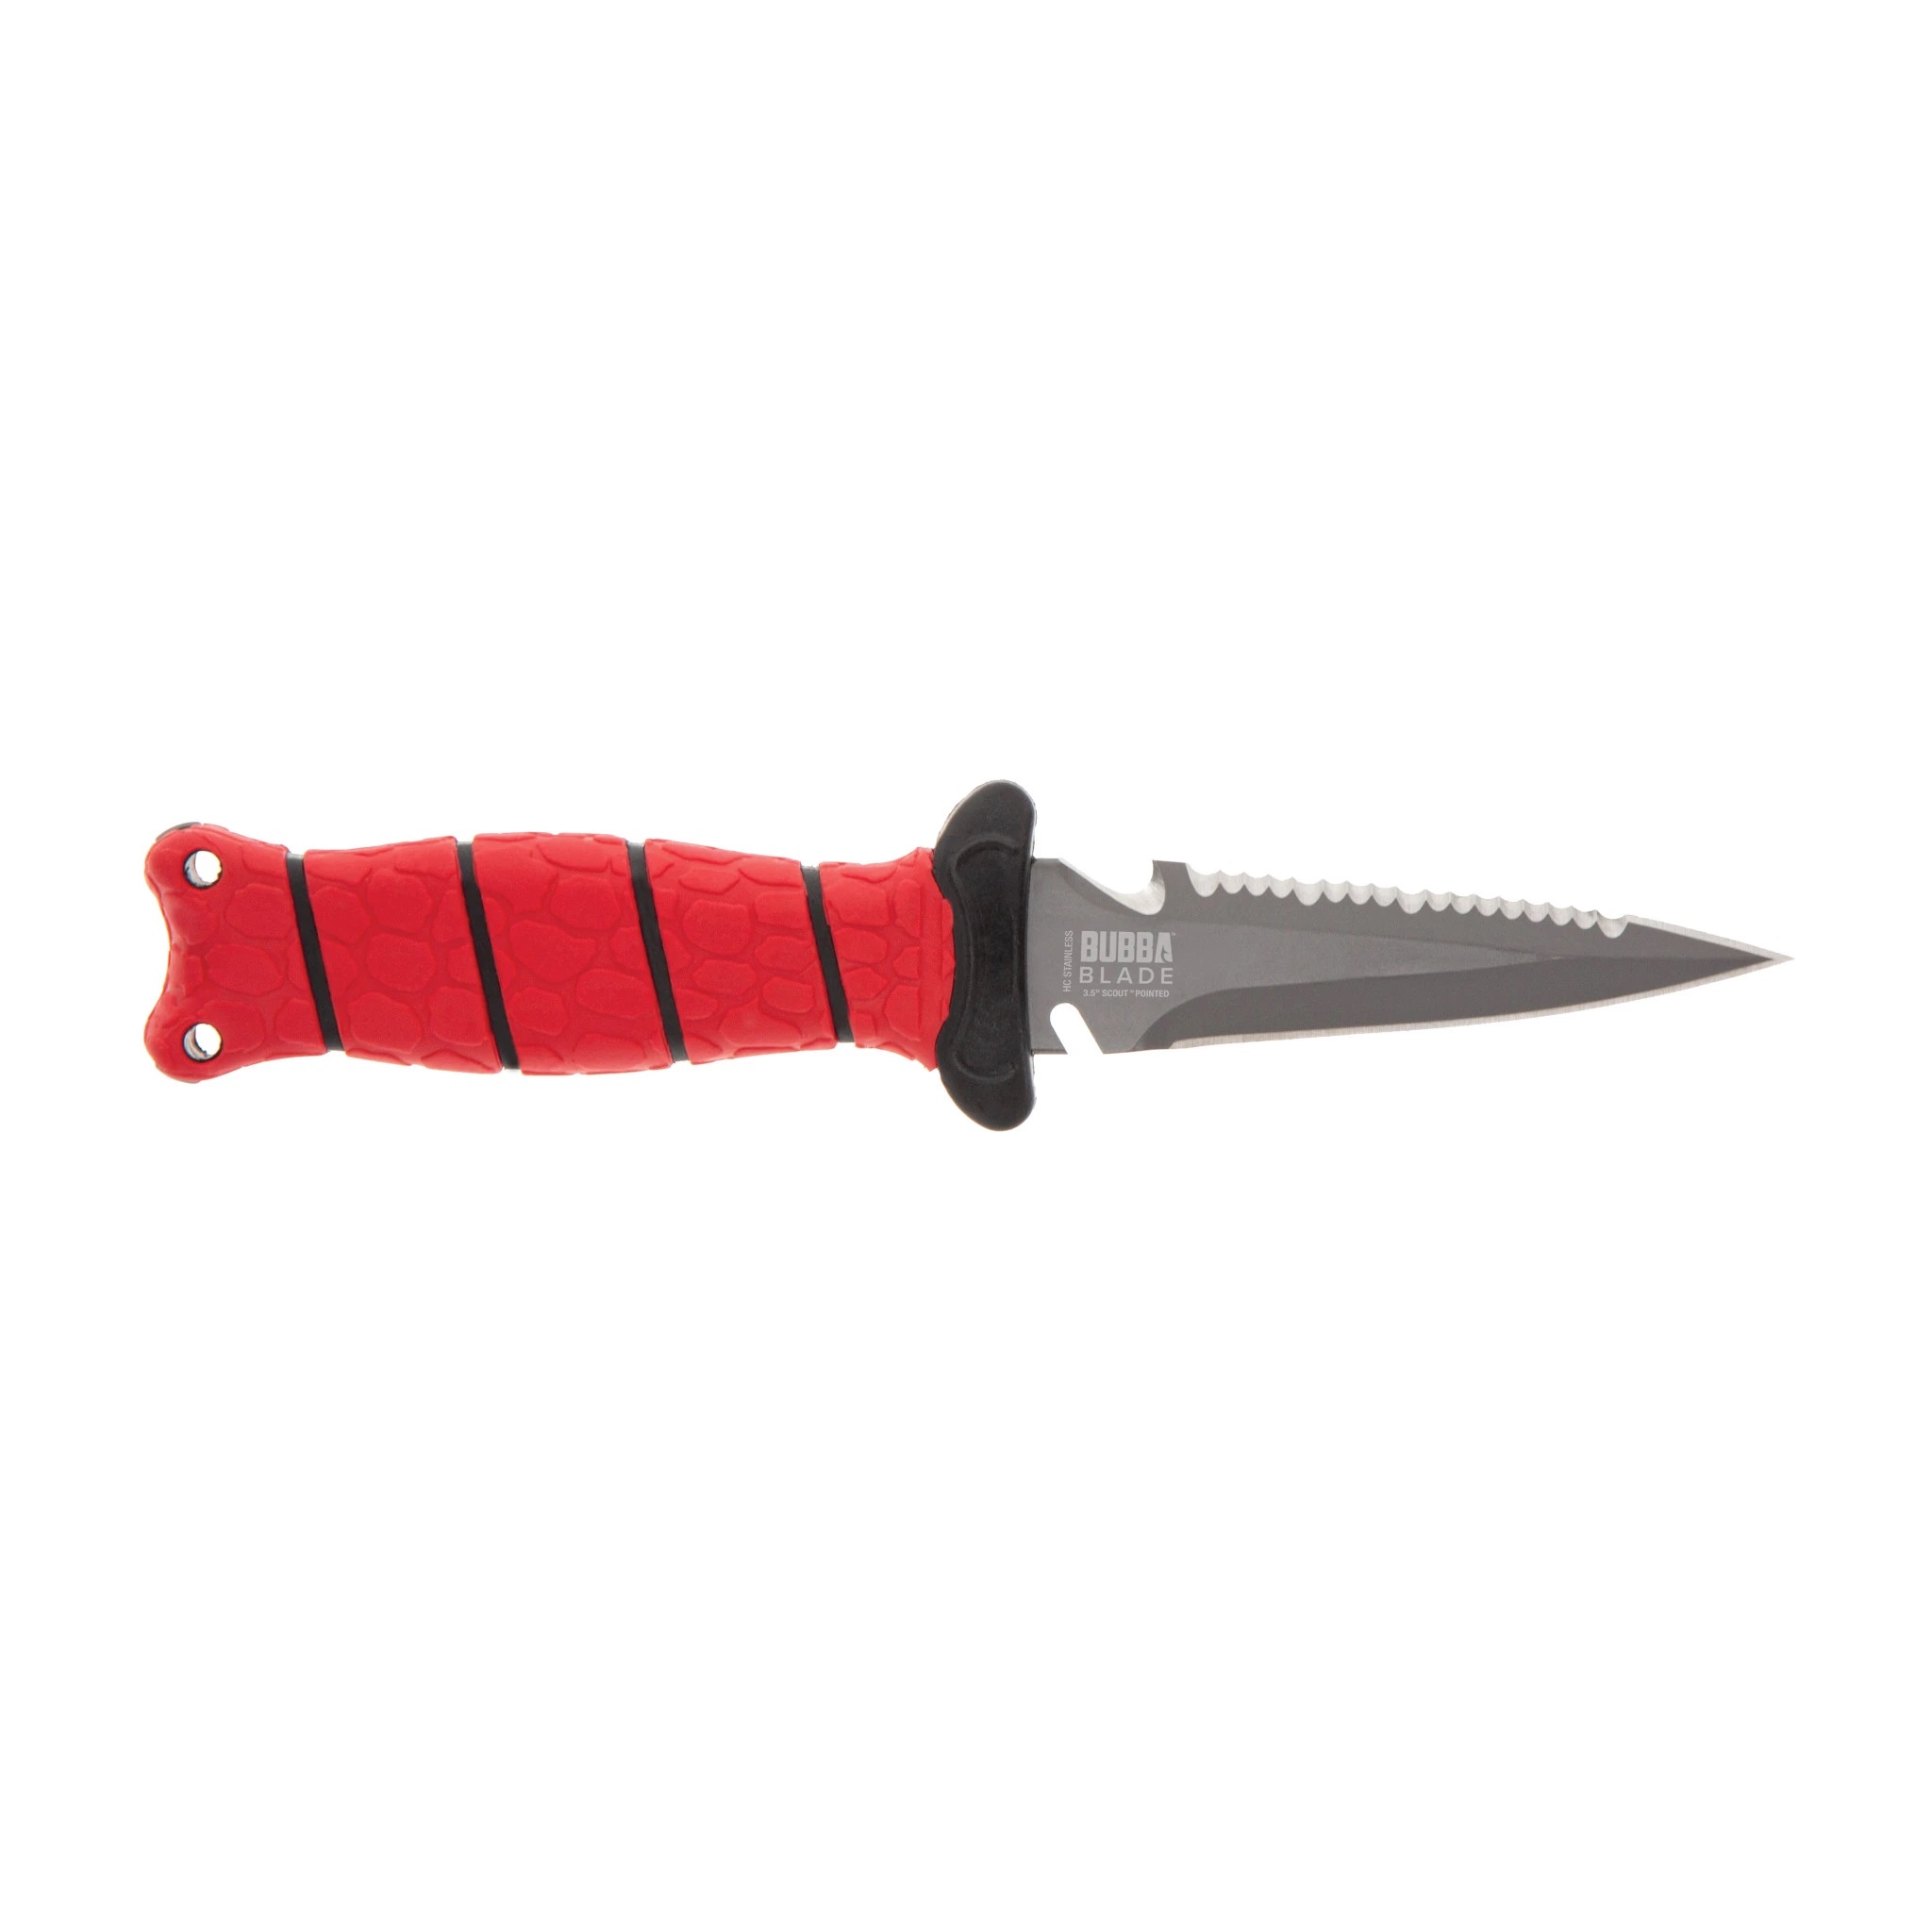 Bubba Blade Scout Pointed Dive Knife